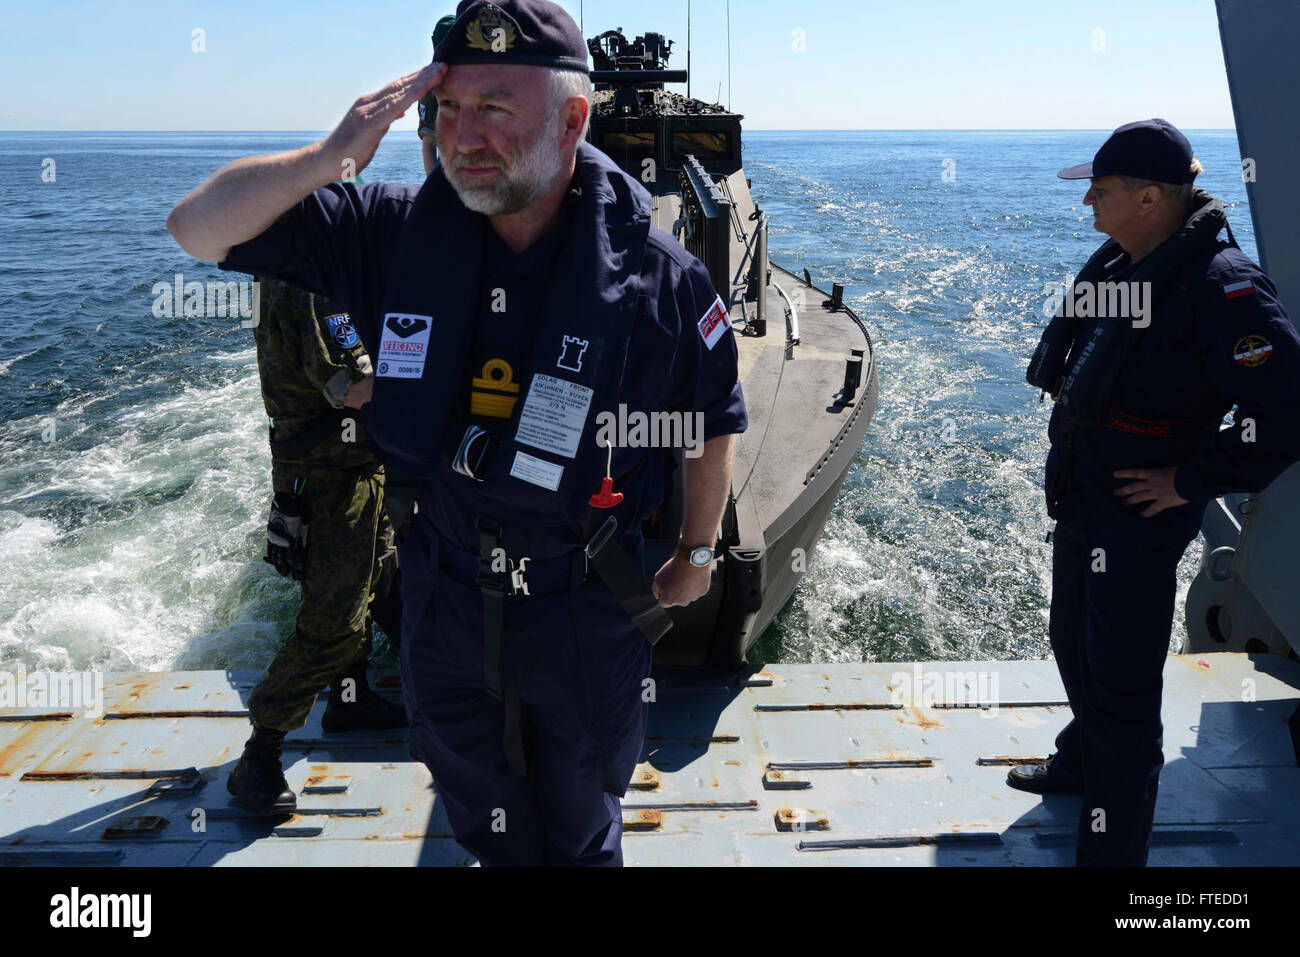 150610-N-SL539-094 BALTIC SEA - (June 10, 2015) â Royal Navy Rear Admiral Tim Lowe Salutes as he boards the Polish navy ship, ORP Gniezno, during BALTOPS 2015. BALTOPS is an annual multinational exercise designed to enhance flexibility and interoperability, as well as demonstrate resolve among allied and partner forces to defend the Baltic region. (U.S. Navy photo by Mass Communication Specialist Seaman Lucas Askew/Released) Stock Photo